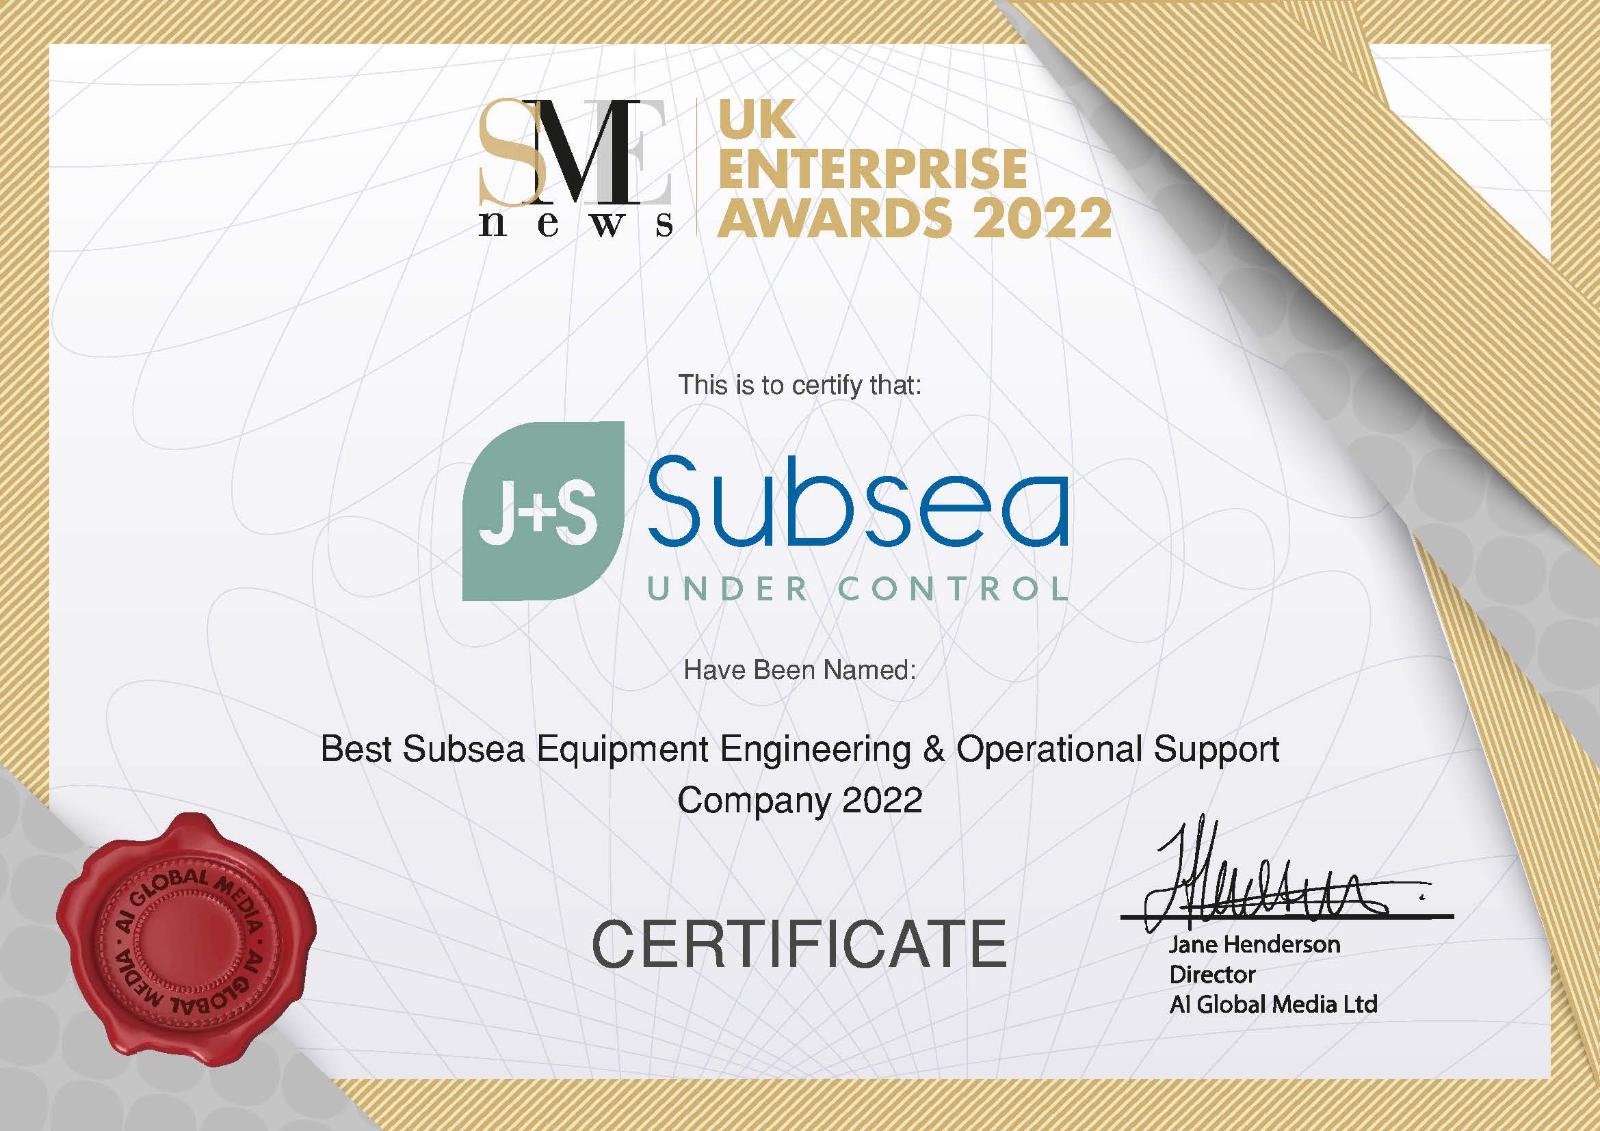 MEMBER NEWS: J+S Subsea wins top subsea accolade in national awards